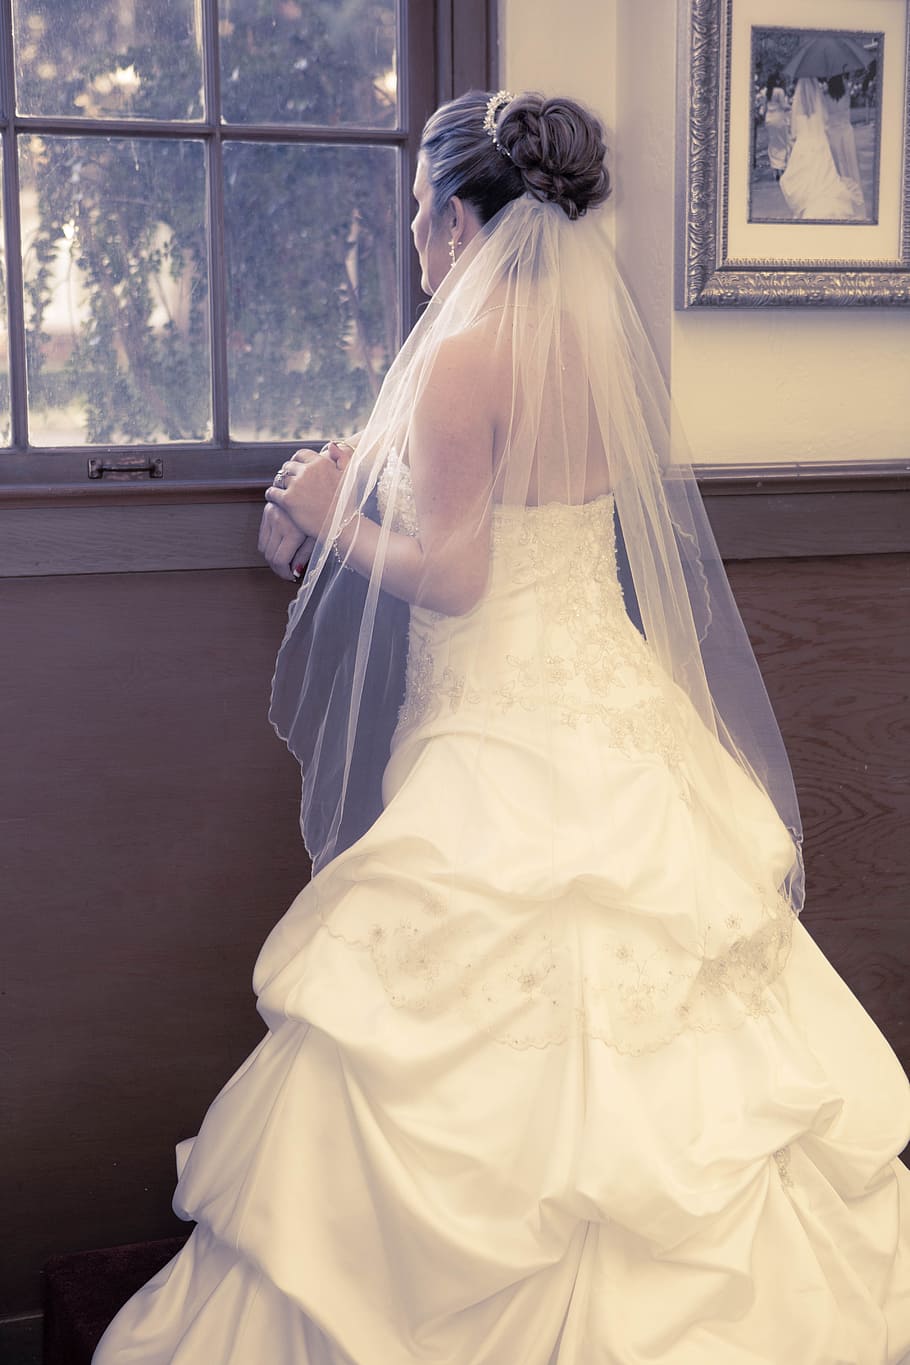 bride, thinking, the big day, nervous, dress, style, marriage, woman, wedding, female